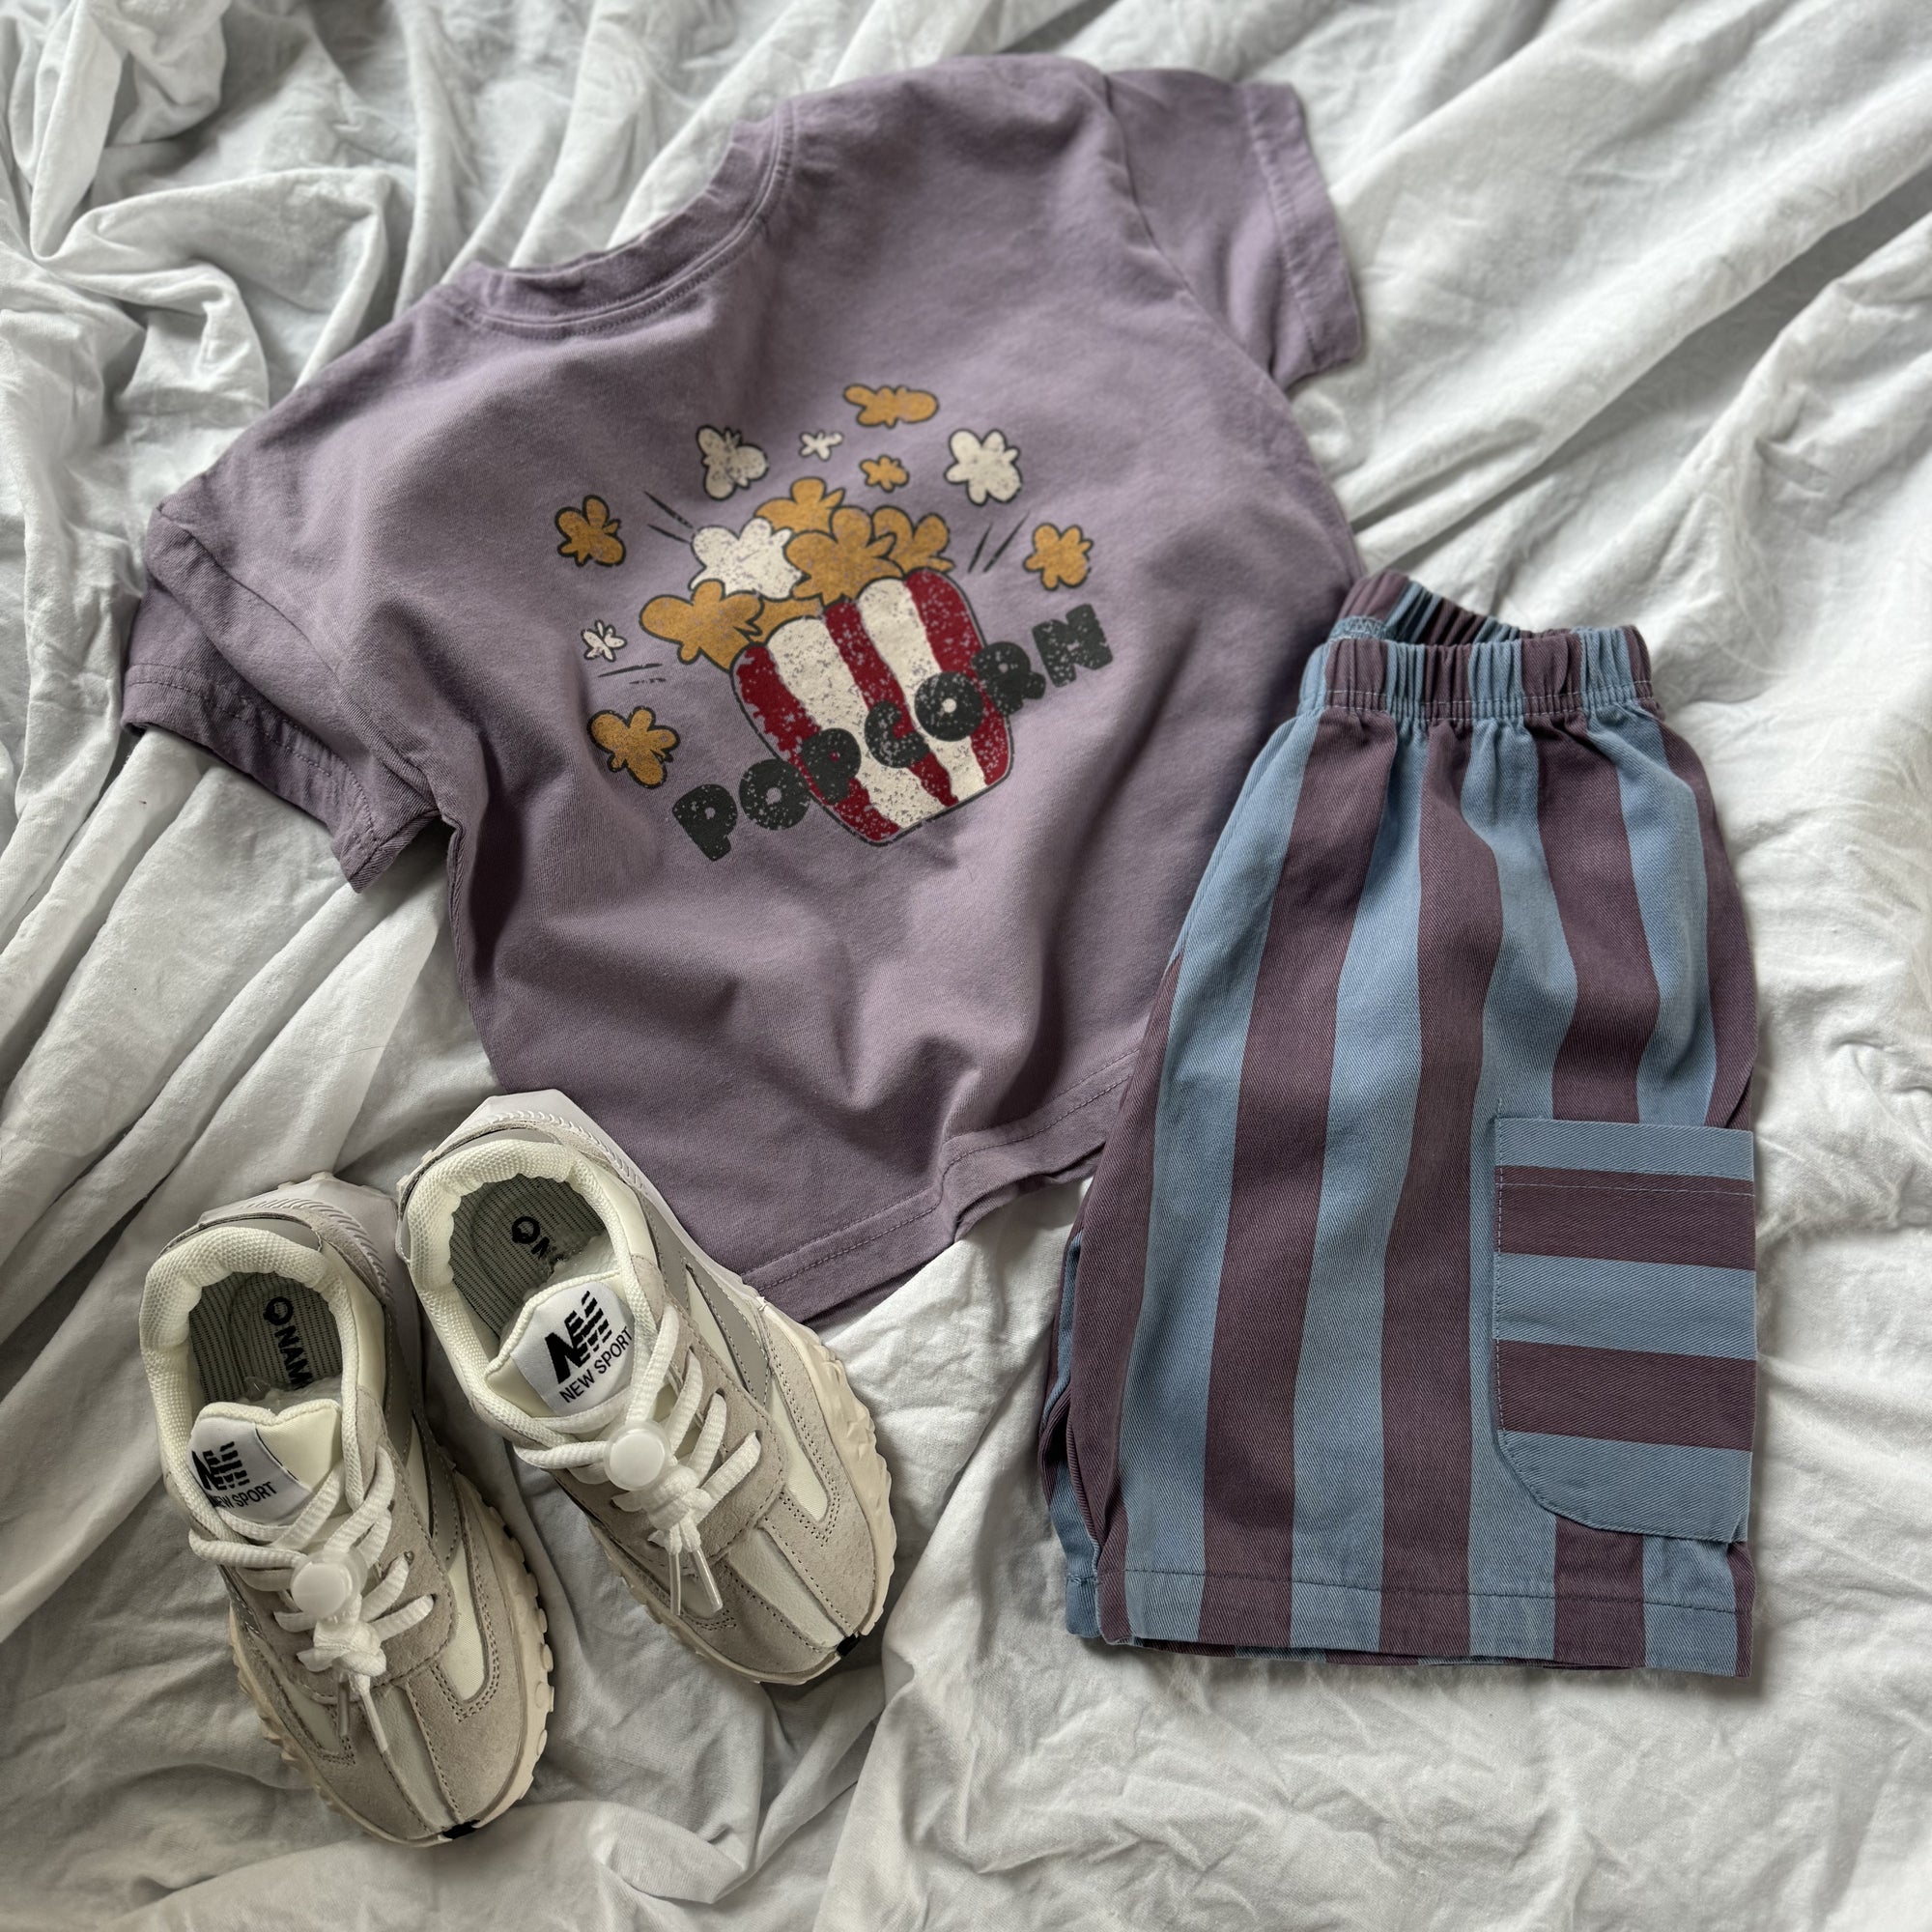 Popcorn Tee find Stylish Fashion for Little People- at Little Foxx Concept Store